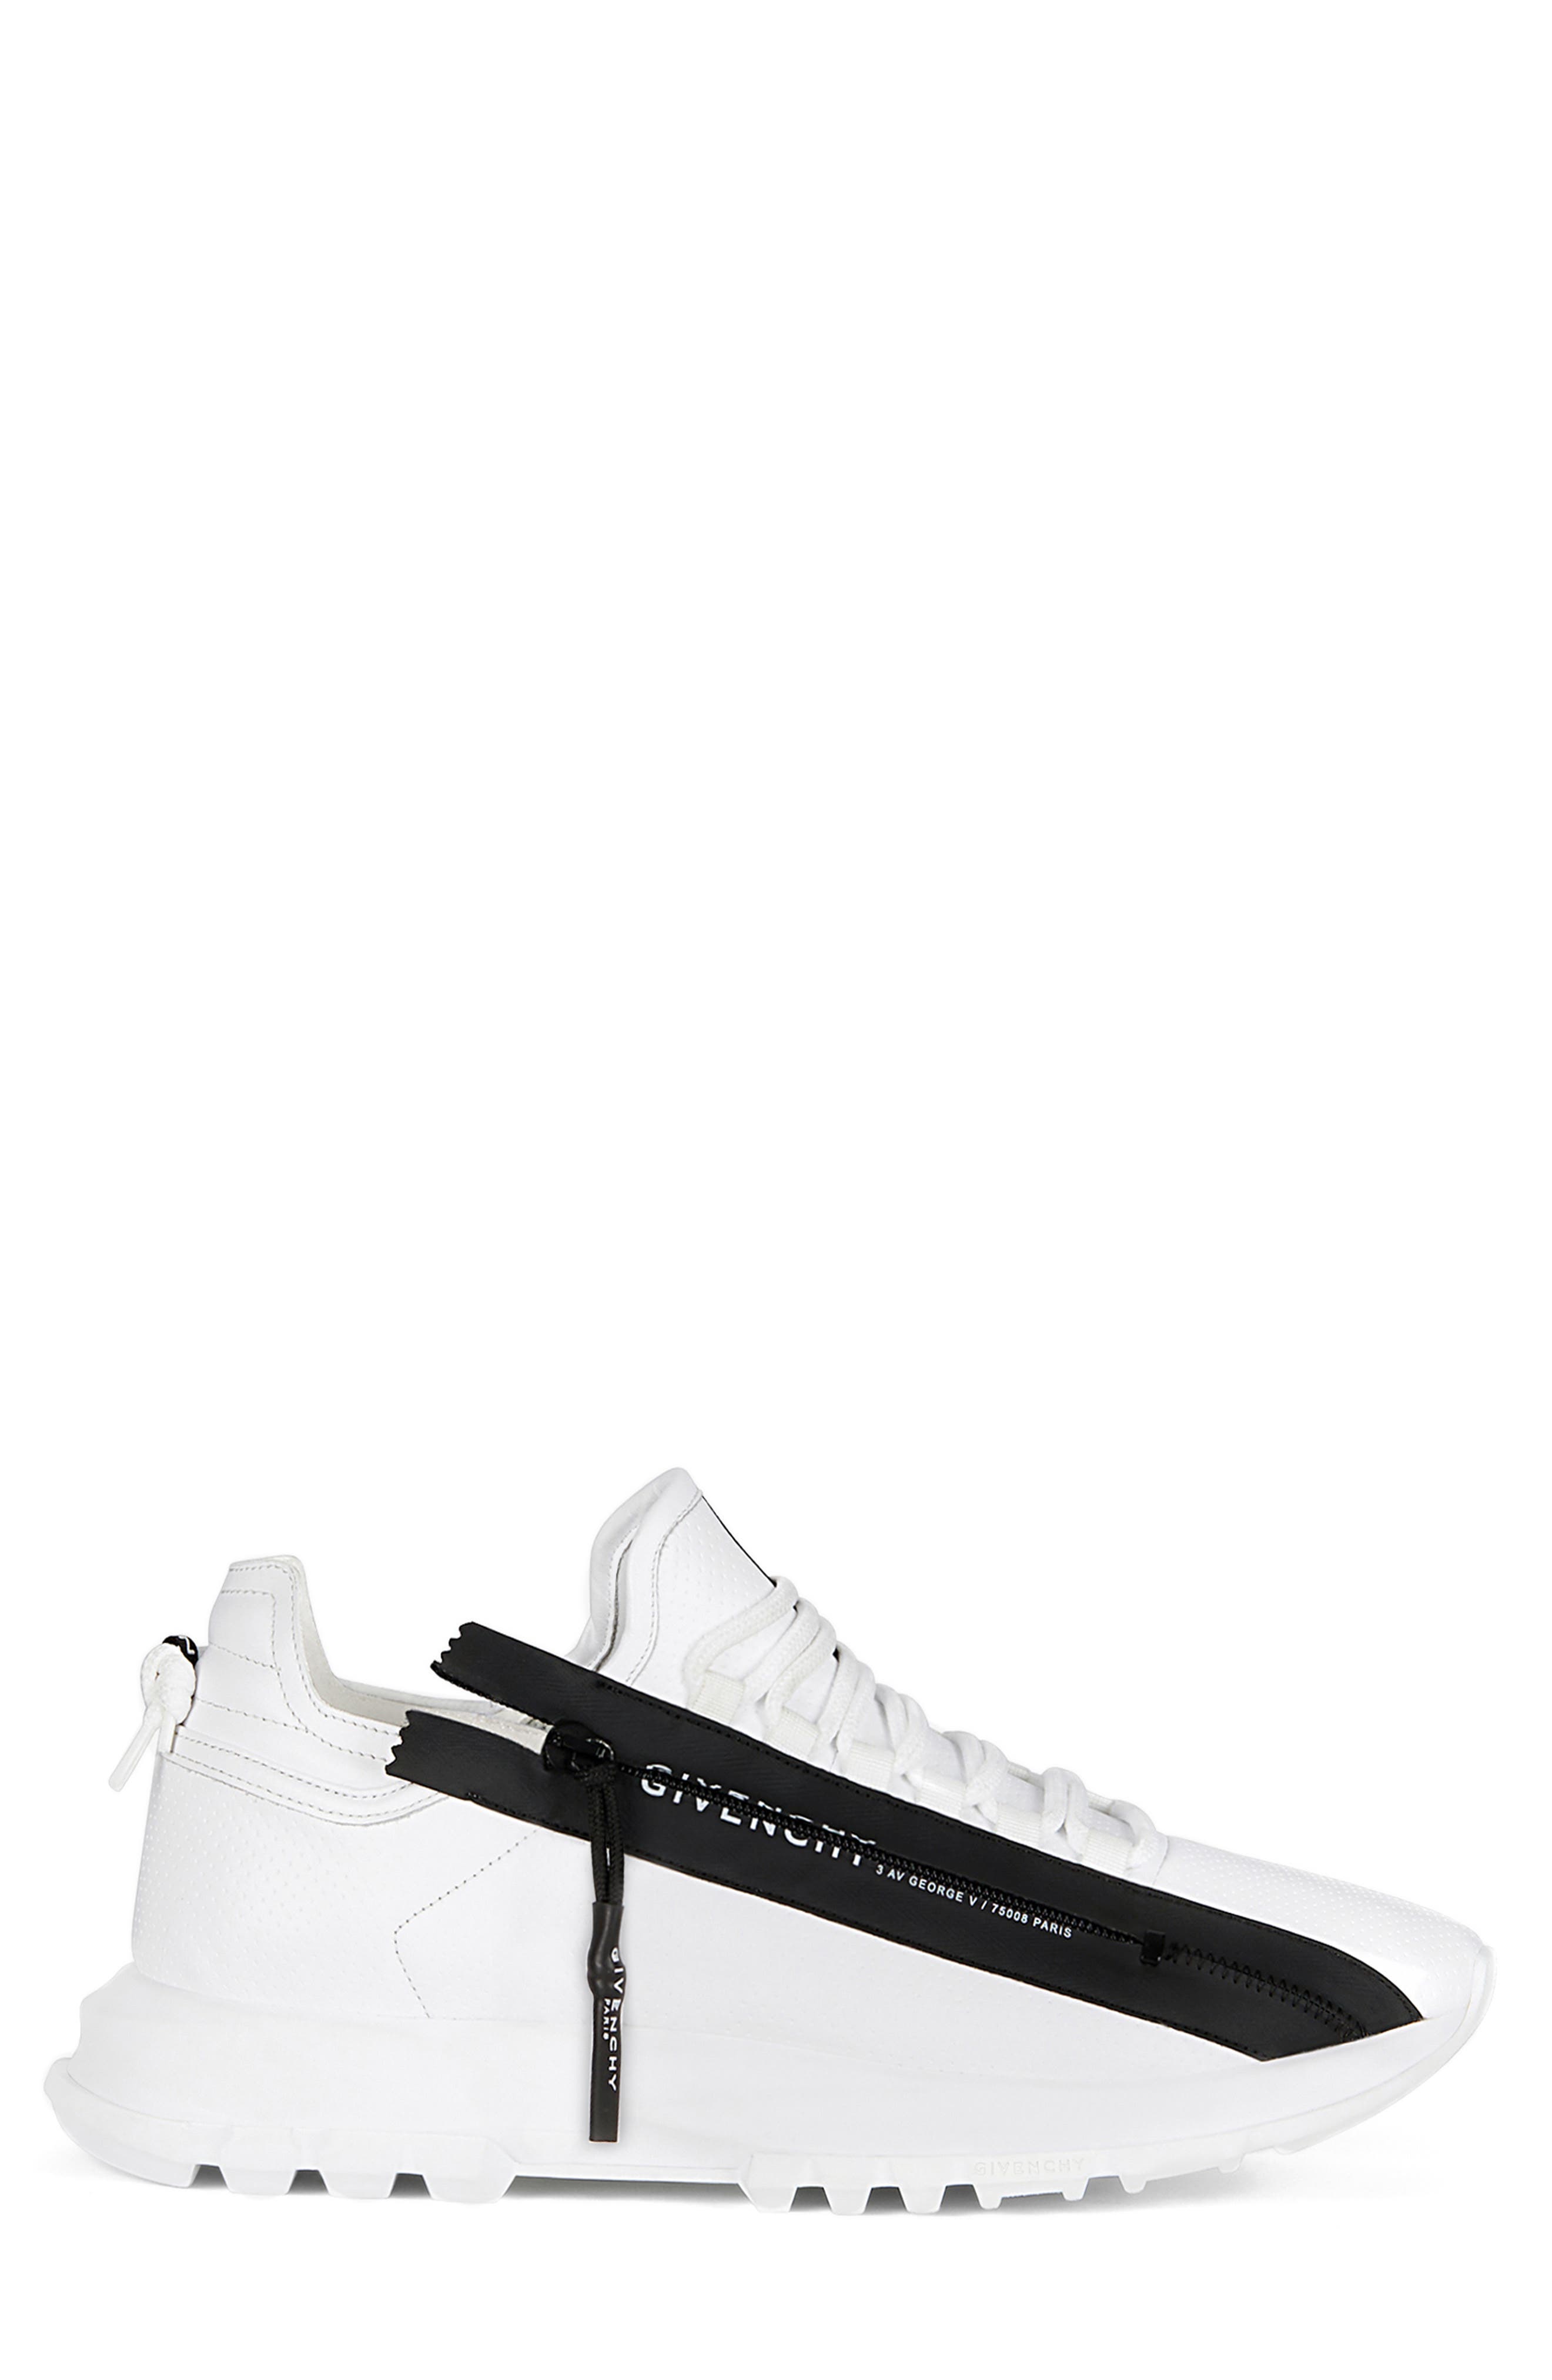 givenchy boots nordstrom